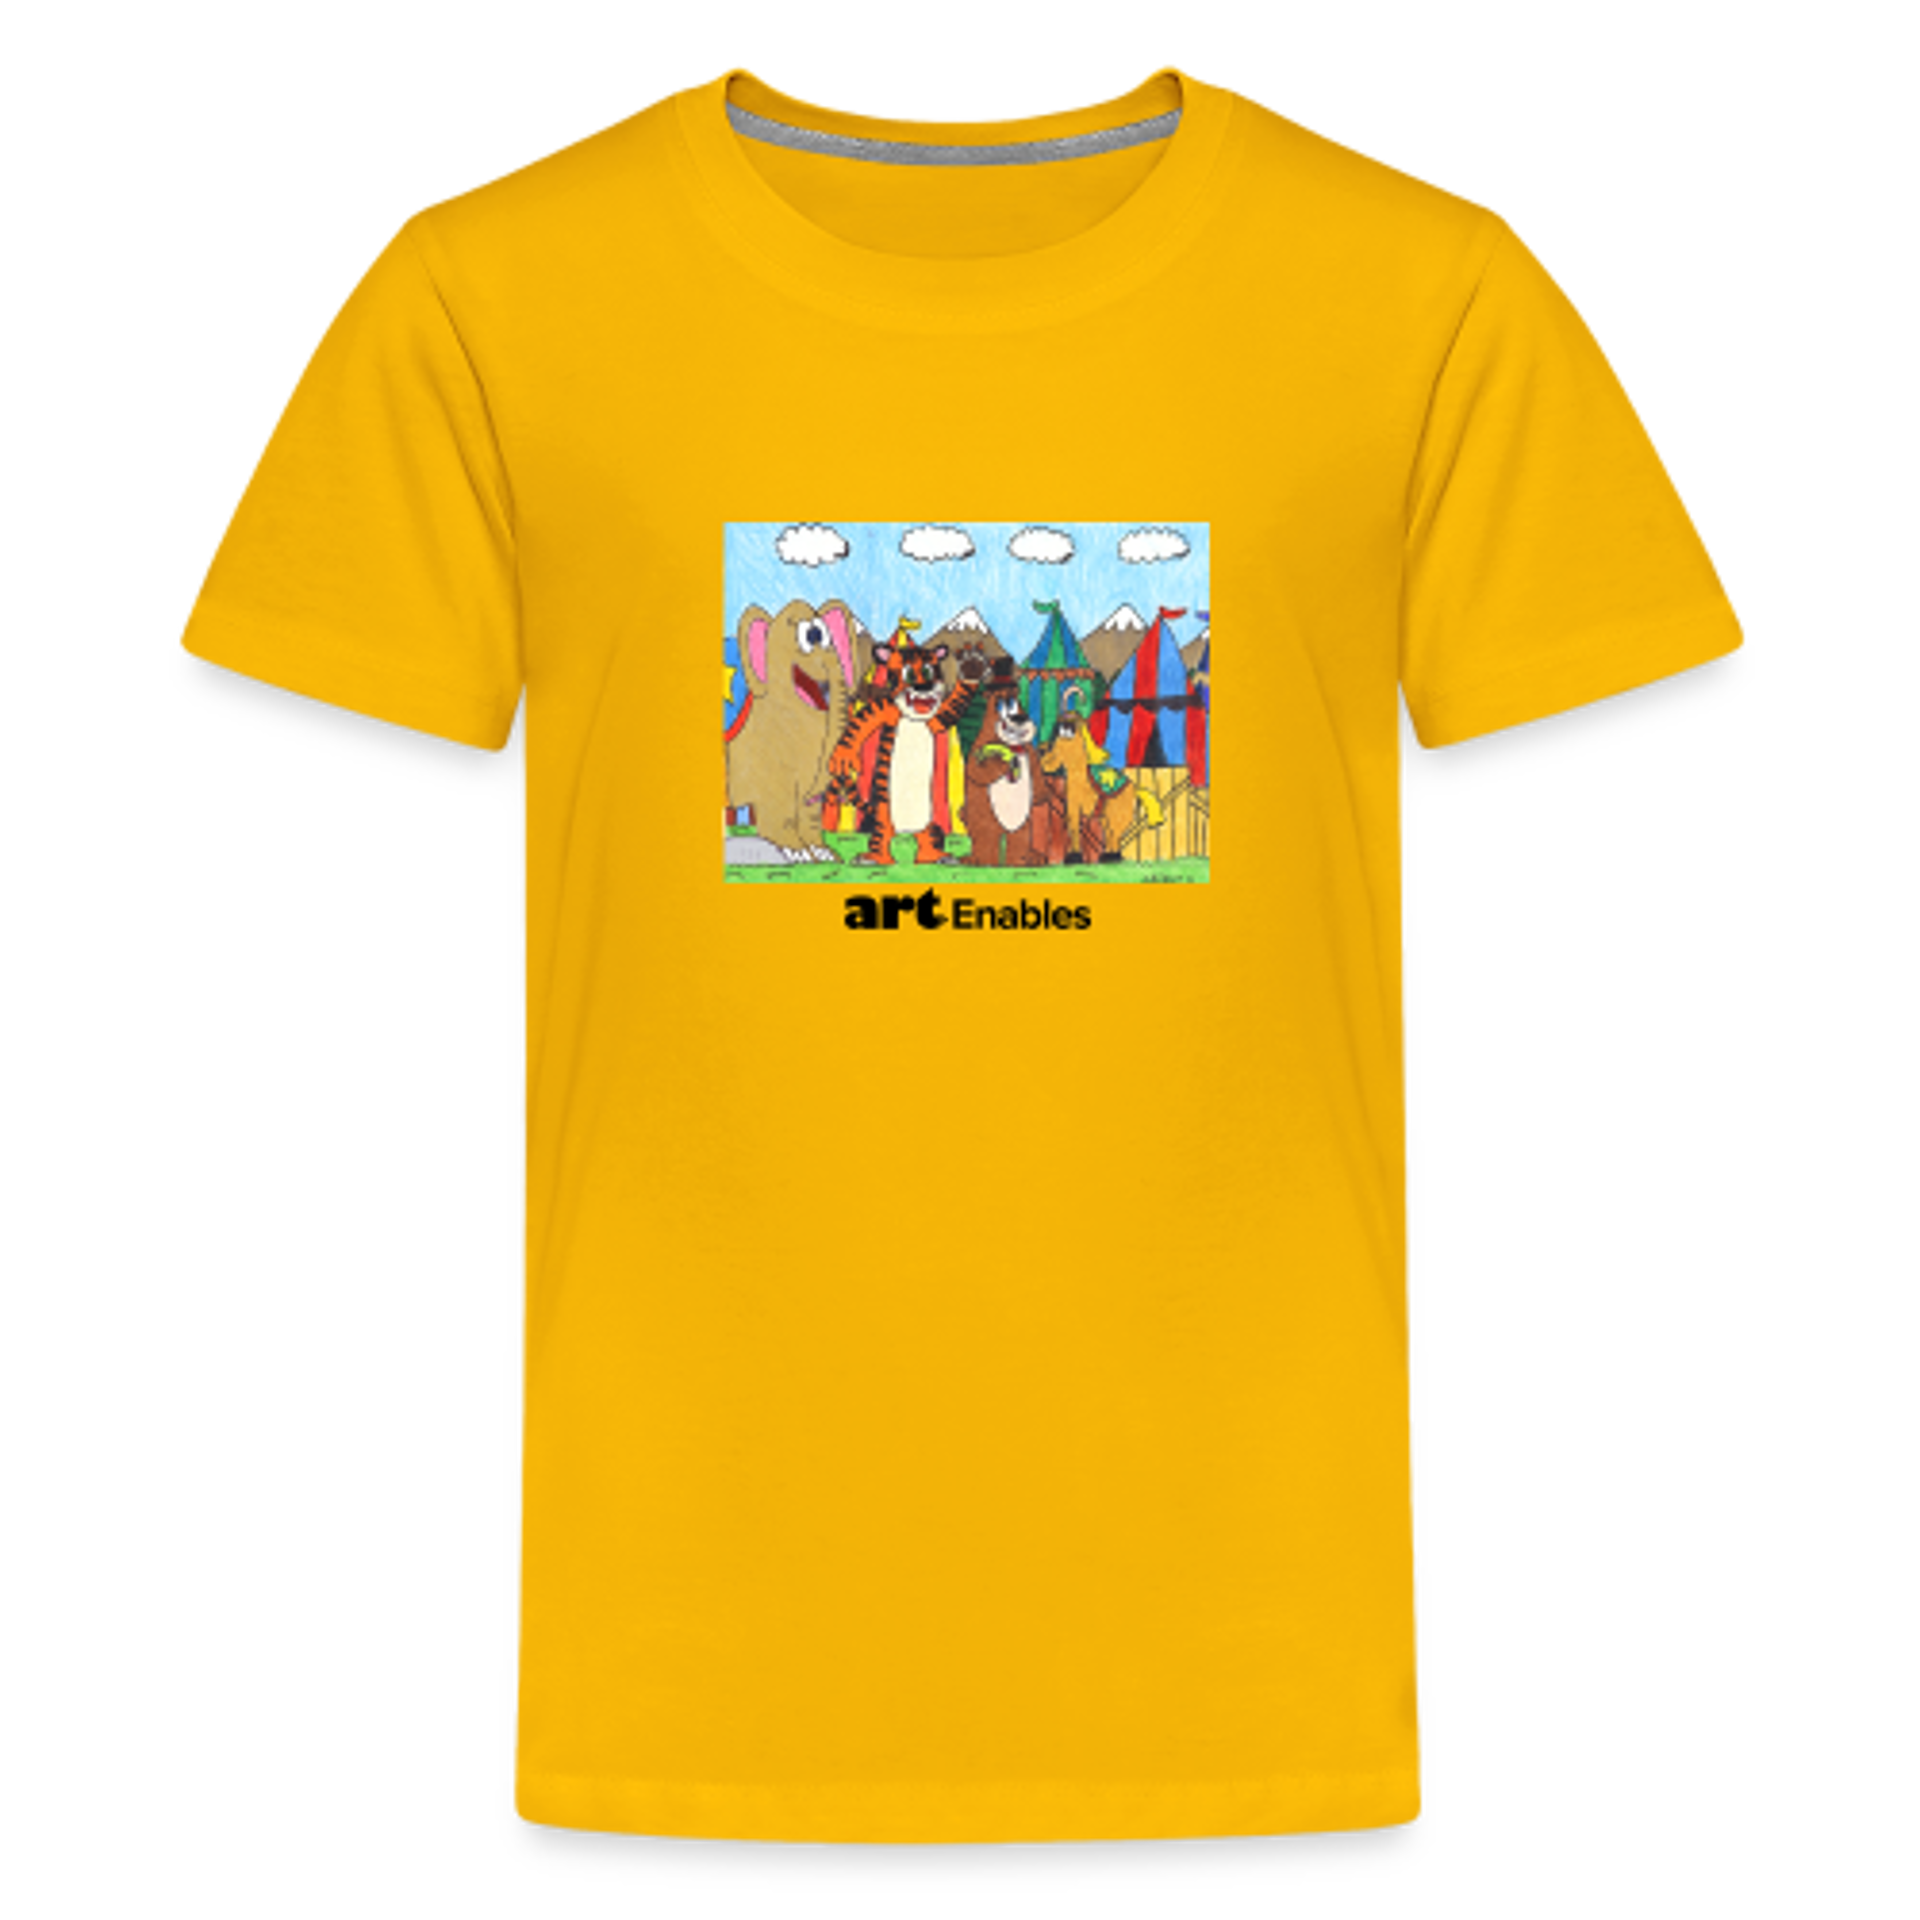 Youth T-shirt (artwork by Maurice Barnes) Medium by Art Enables Merchandise